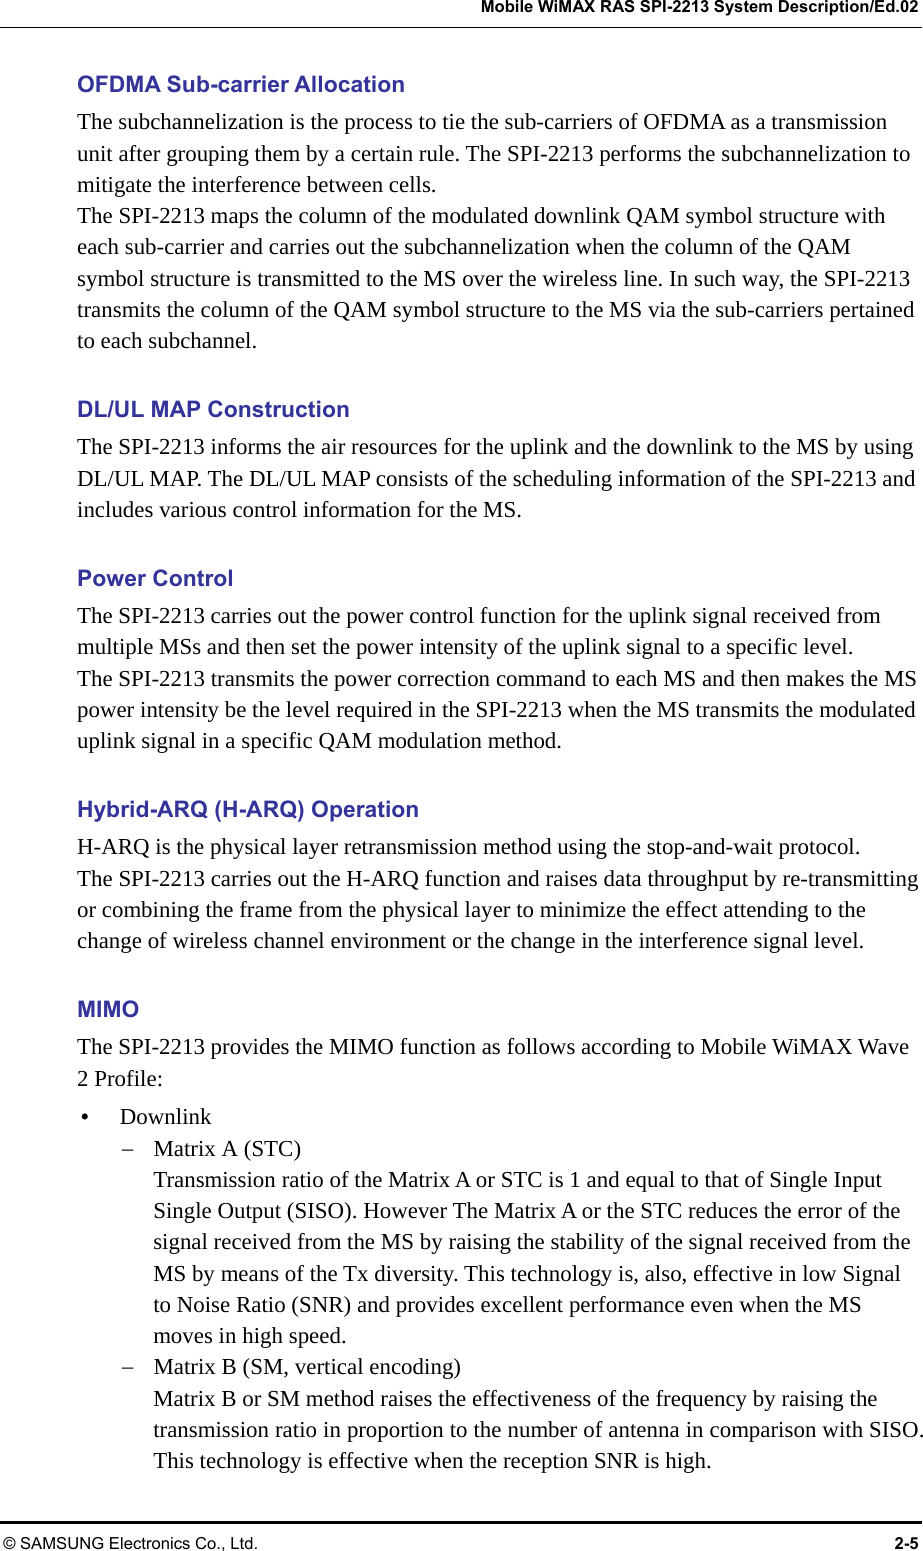   Mobile WiMAX RAS SPI-2213 System Description/Ed.02 © SAMSUNG Electronics Co., Ltd.  2-5 OFDMA Sub-carrier Allocation The subchannelization is the process to tie the sub-carriers of OFDMA as a transmission unit after grouping them by a certain rule. The SPI-2213 performs the subchannelization to mitigate the interference between cells. The SPI-2213 maps the column of the modulated downlink QAM symbol structure with each sub-carrier and carries out the subchannelization when the column of the QAM symbol structure is transmitted to the MS over the wireless line. In such way, the SPI-2213 transmits the column of the QAM symbol structure to the MS via the sub-carriers pertained to each subchannel.  DL/UL MAP Construction The SPI-2213 informs the air resources for the uplink and the downlink to the MS by using DL/UL MAP. The DL/UL MAP consists of the scheduling information of the SPI-2213 and includes various control information for the MS.  Power Control The SPI-2213 carries out the power control function for the uplink signal received from multiple MSs and then set the power intensity of the uplink signal to a specific level. The SPI-2213 transmits the power correction command to each MS and then makes the MS power intensity be the level required in the SPI-2213 when the MS transmits the modulated uplink signal in a specific QAM modulation method.  Hybrid-ARQ (H-ARQ) Operation H-ARQ is the physical layer retransmission method using the stop-and-wait protocol.   The SPI-2213 carries out the H-ARQ function and raises data throughput by re-transmitting or combining the frame from the physical layer to minimize the effect attending to the change of wireless channel environment or the change in the interference signal level.  MIMO The SPI-2213 provides the MIMO function as follows according to Mobile WiMAX Wave 2 Profile: y Downlink − Matrix A (STC) Transmission ratio of the Matrix A or STC is 1 and equal to that of Single Input Single Output (SISO). However The Matrix A or the STC reduces the error of the signal received from the MS by raising the stability of the signal received from the MS by means of the Tx diversity. This technology is, also, effective in low Signal to Noise Ratio (SNR) and provides excellent performance even when the MS moves in high speed. − Matrix B (SM, vertical encoding) Matrix B or SM method raises the effectiveness of the frequency by raising the transmission ratio in proportion to the number of antenna in comparison with SISO. This technology is effective when the reception SNR is high. 